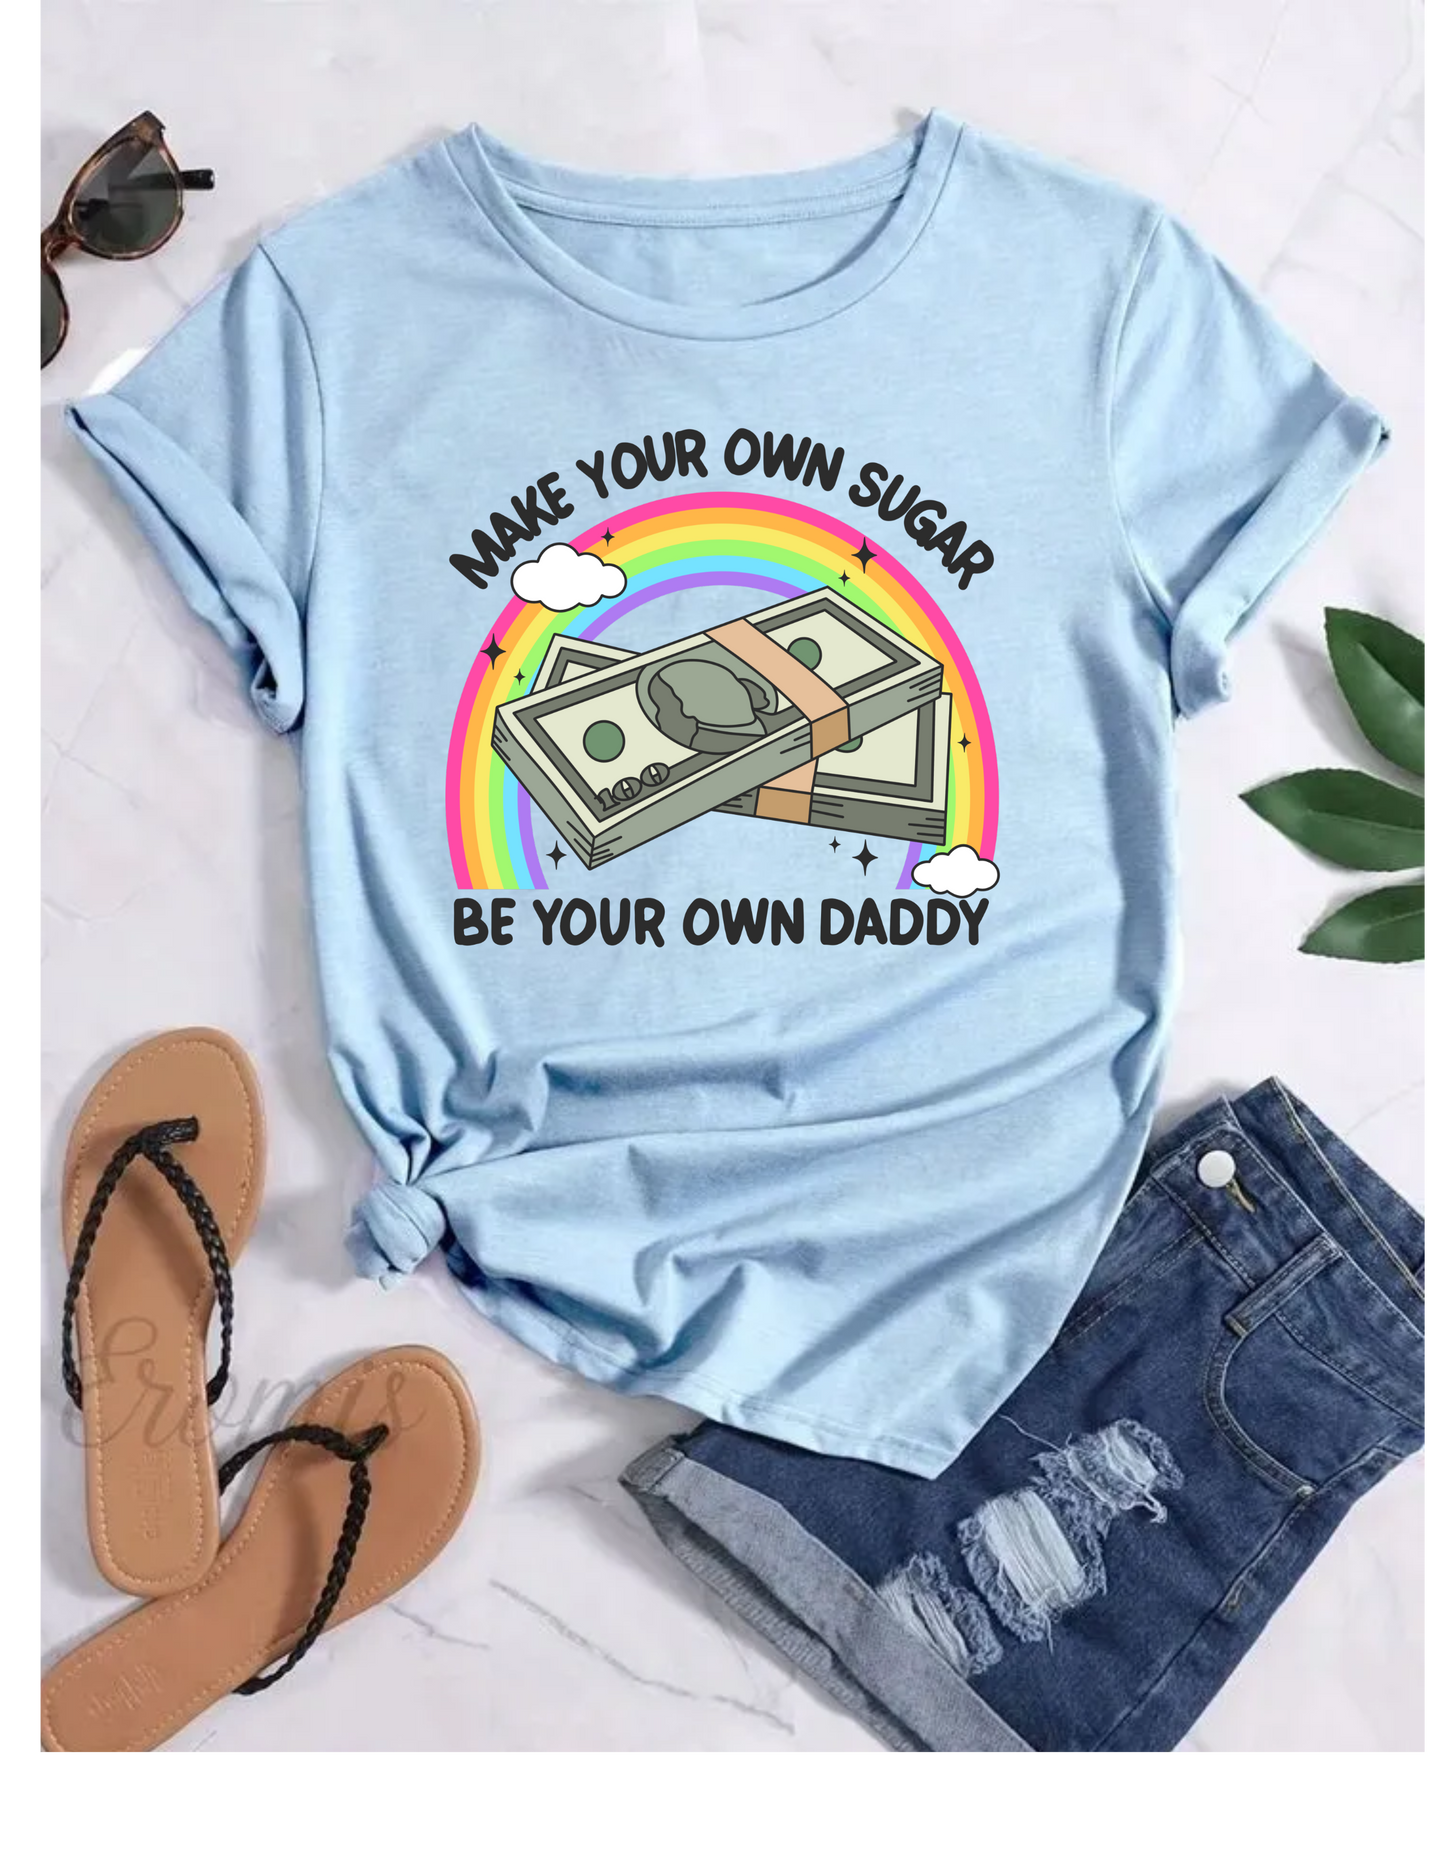 Make Your Own Sugar Be Your Own Daddy Graphic Tee